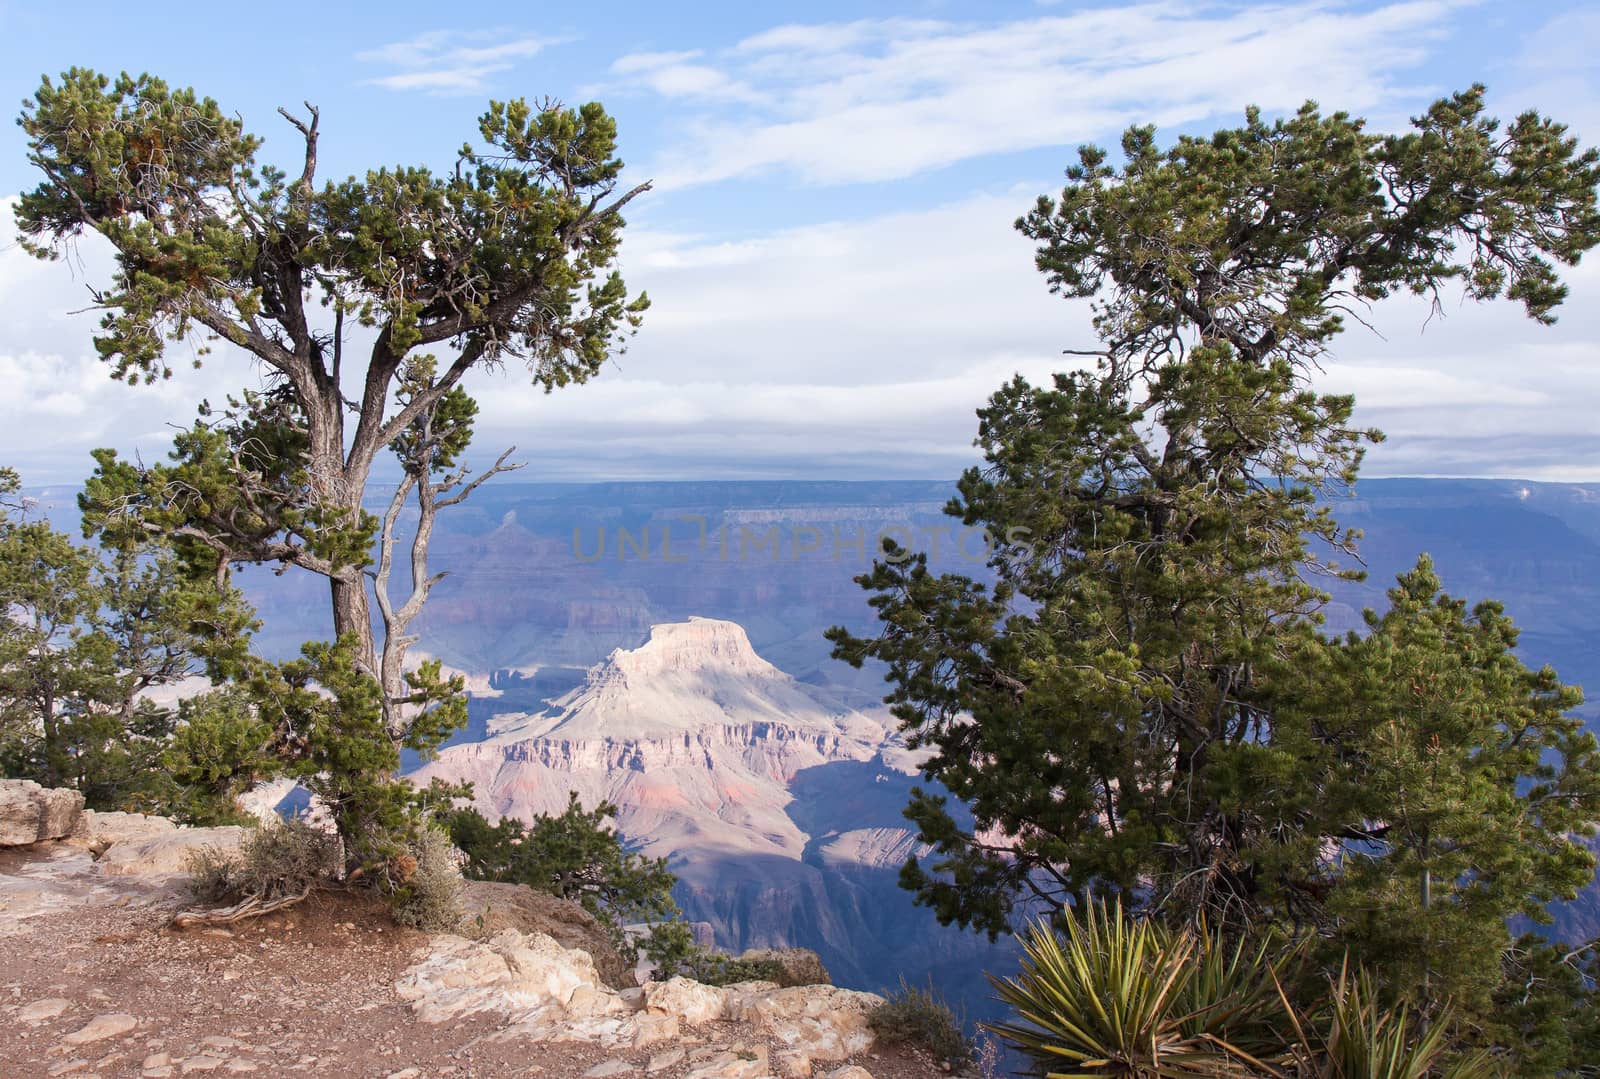 Two Utah Junipers are growing right on the South edge of the Grand Canyon.